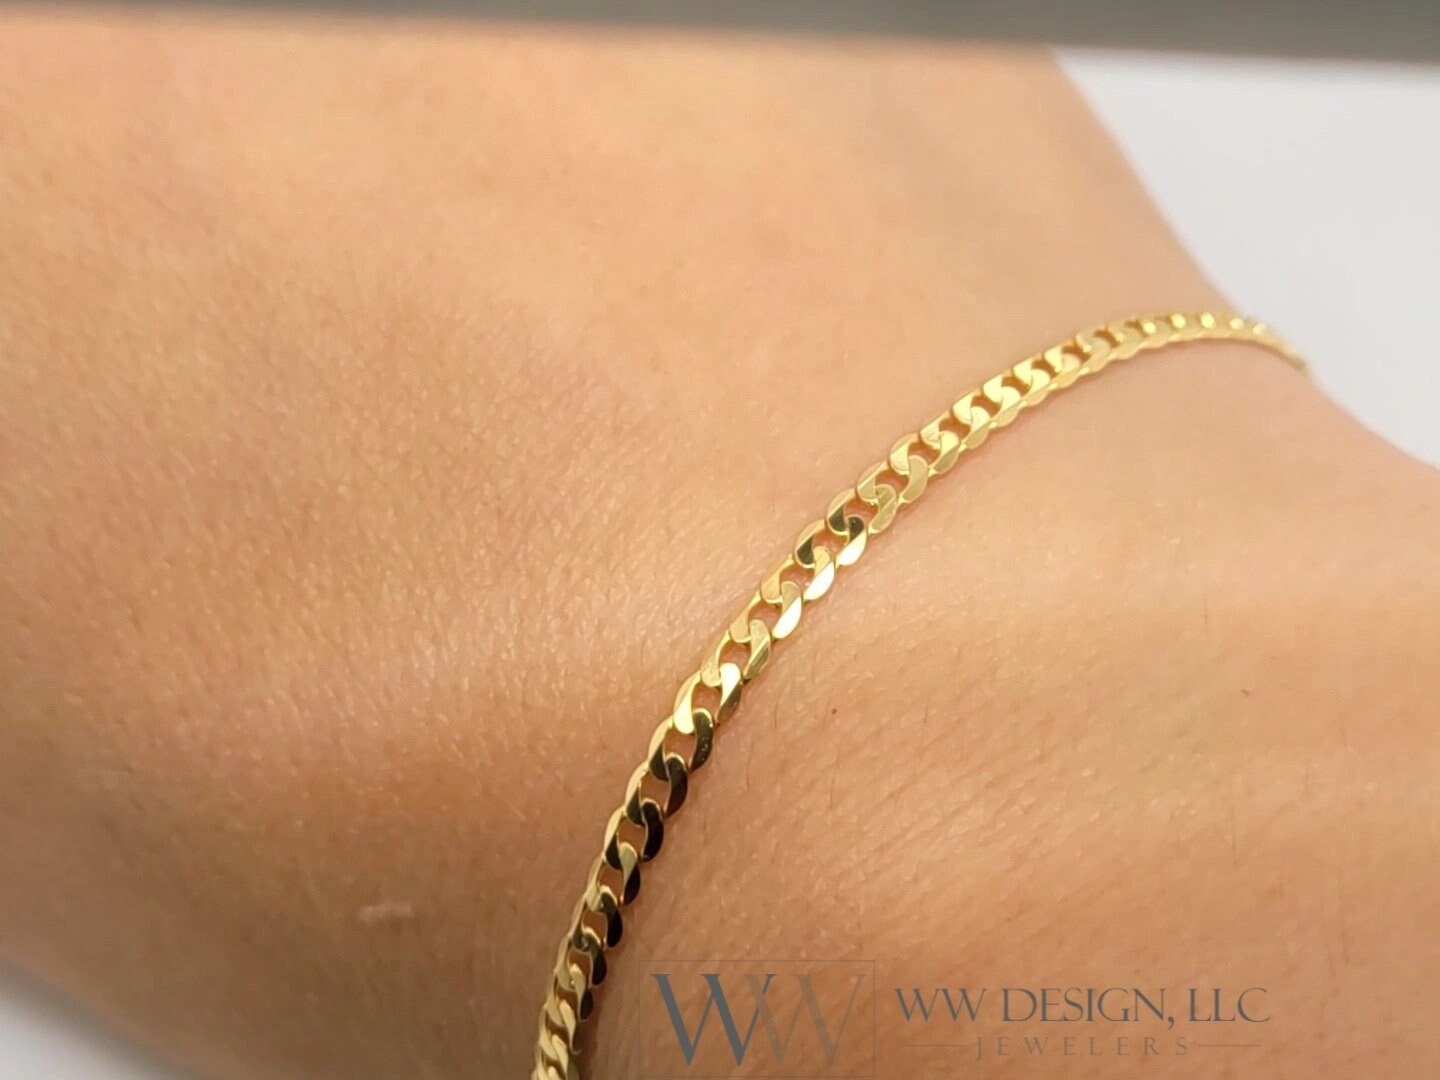 14k Gold Curb Cuban Bracelet FLAT 3mm 14k Solid Yellow Gold Jewelry Gift 7 inches Very Shiny High Polish Bridesmaids Gift Christmas Present